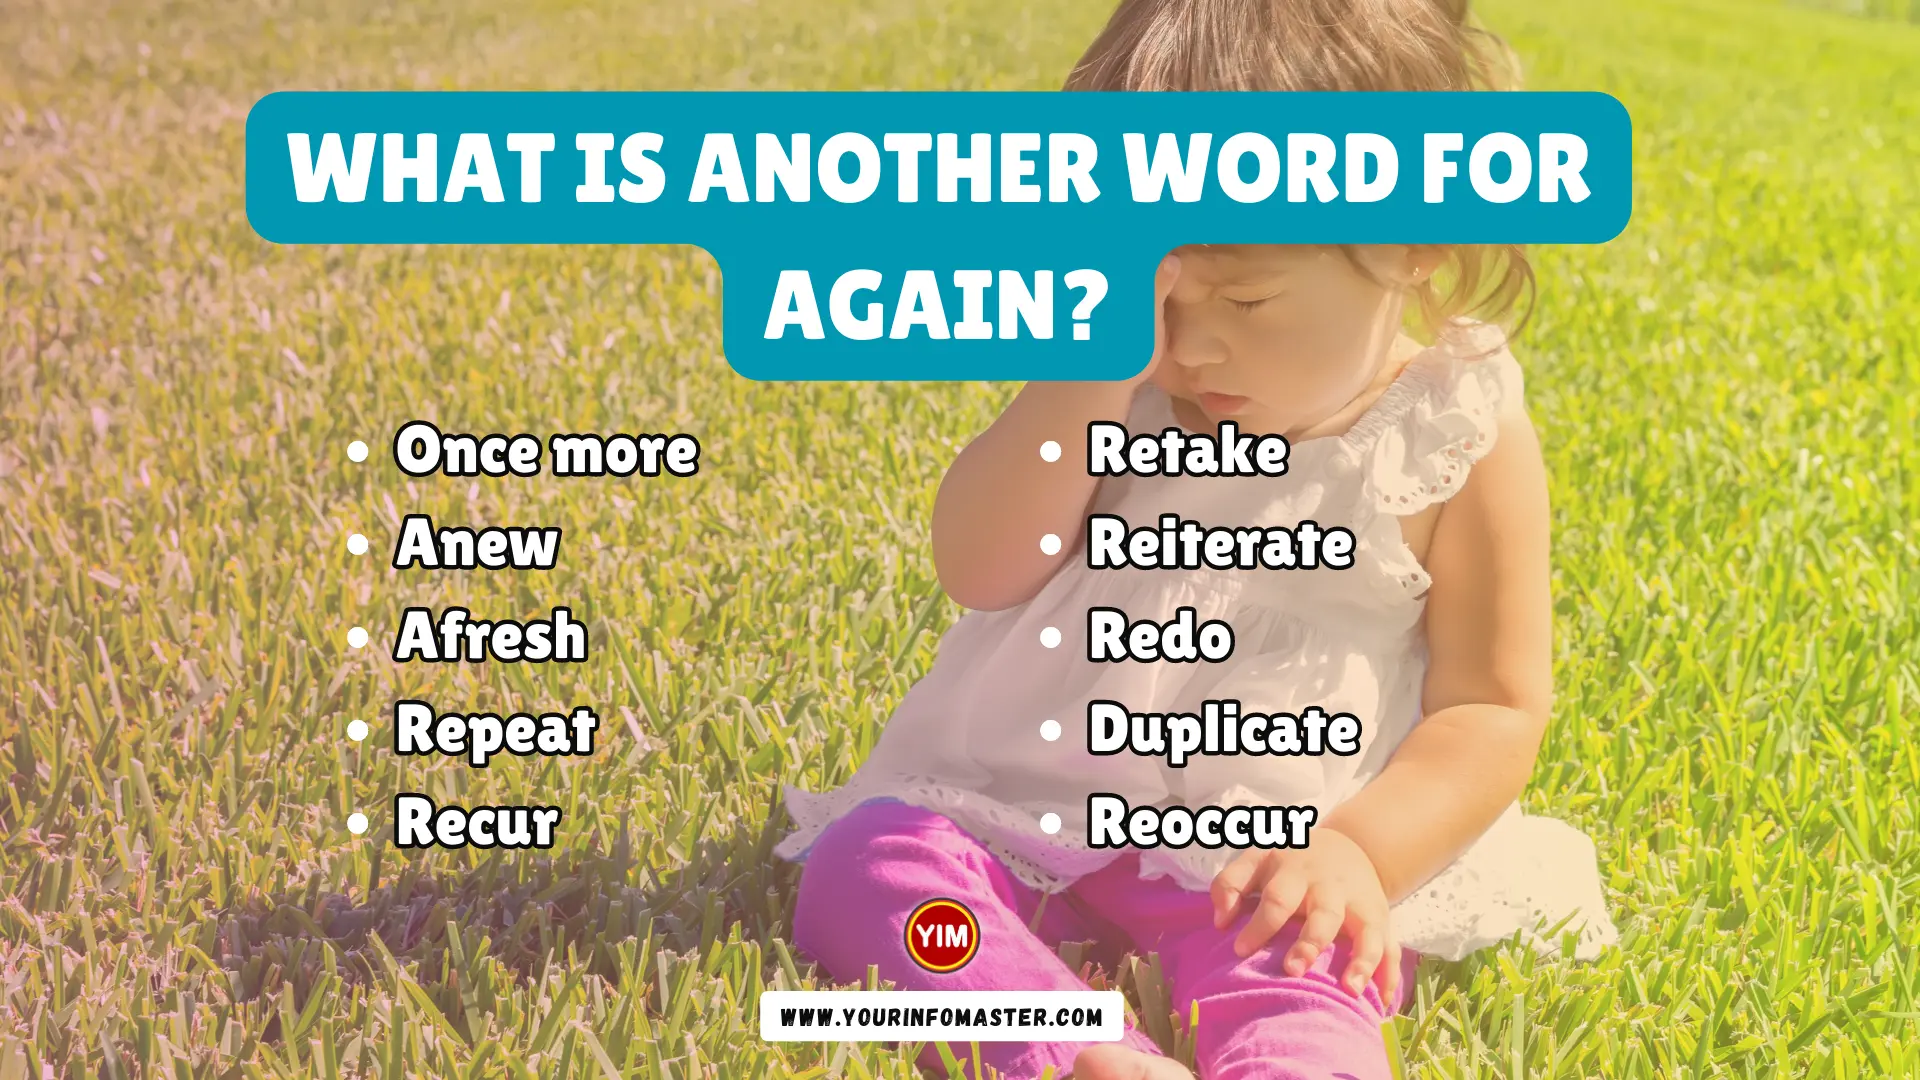 What is another word for Again